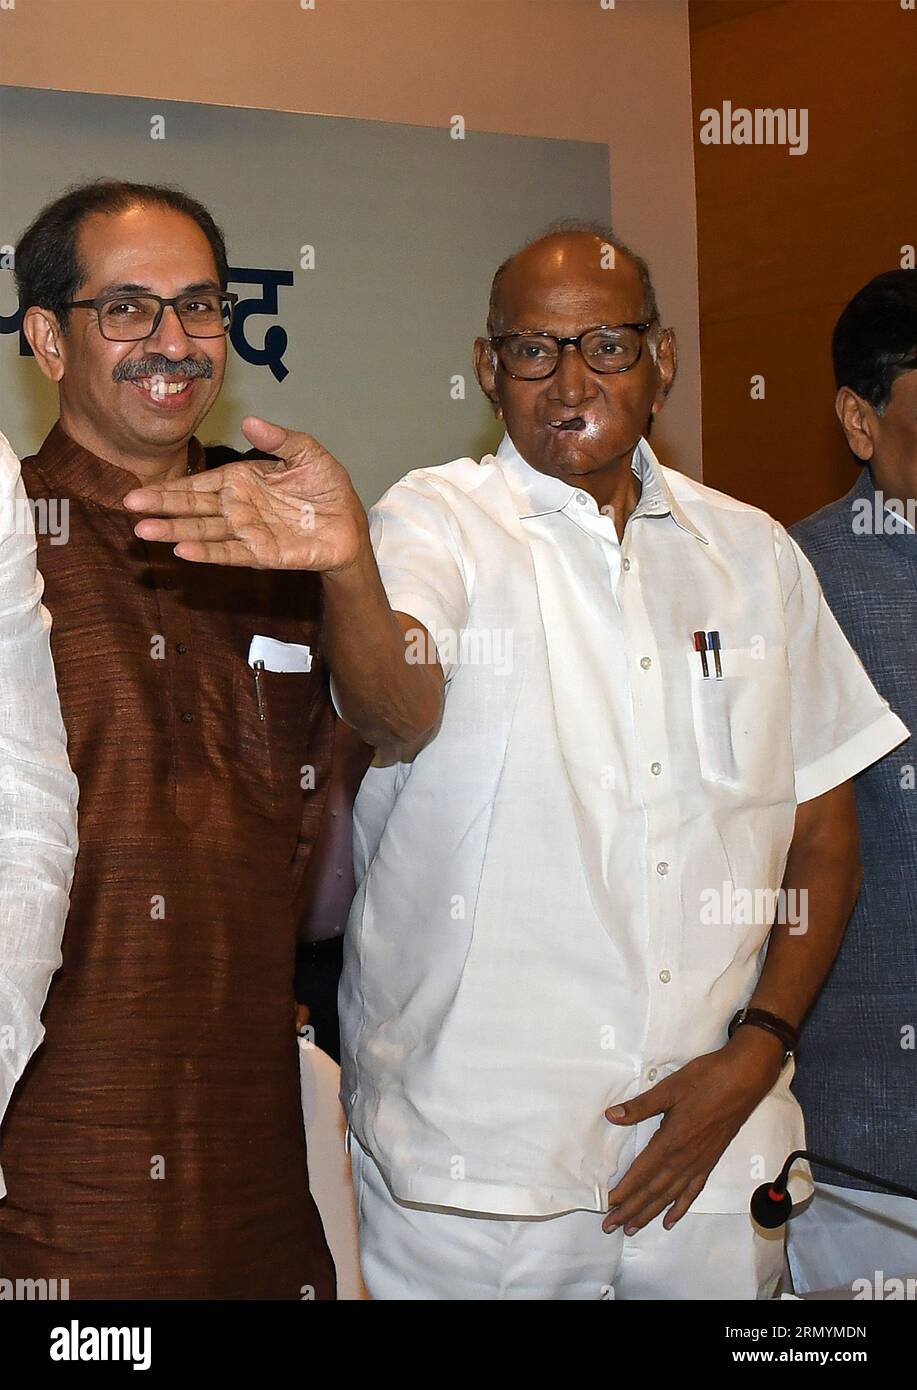 Mumbai, India. 30th Aug, 2023. L-R Shiv Sena (UBT) chief Uddhav Thackeray pose for a photo with Nationalist Congress Party (NCP) chief Sharad Govindrao Pawar after the Maha Vikas Aghadi (MVA) press conference in Mumbai. The press conference was held ahead of Indian National Developmental Inclusive Alliance (INDIA) third meeting to be held on 31st August and 1st September 2023. Credit: SOPA Images Limited/Alamy Live News Stock Photo